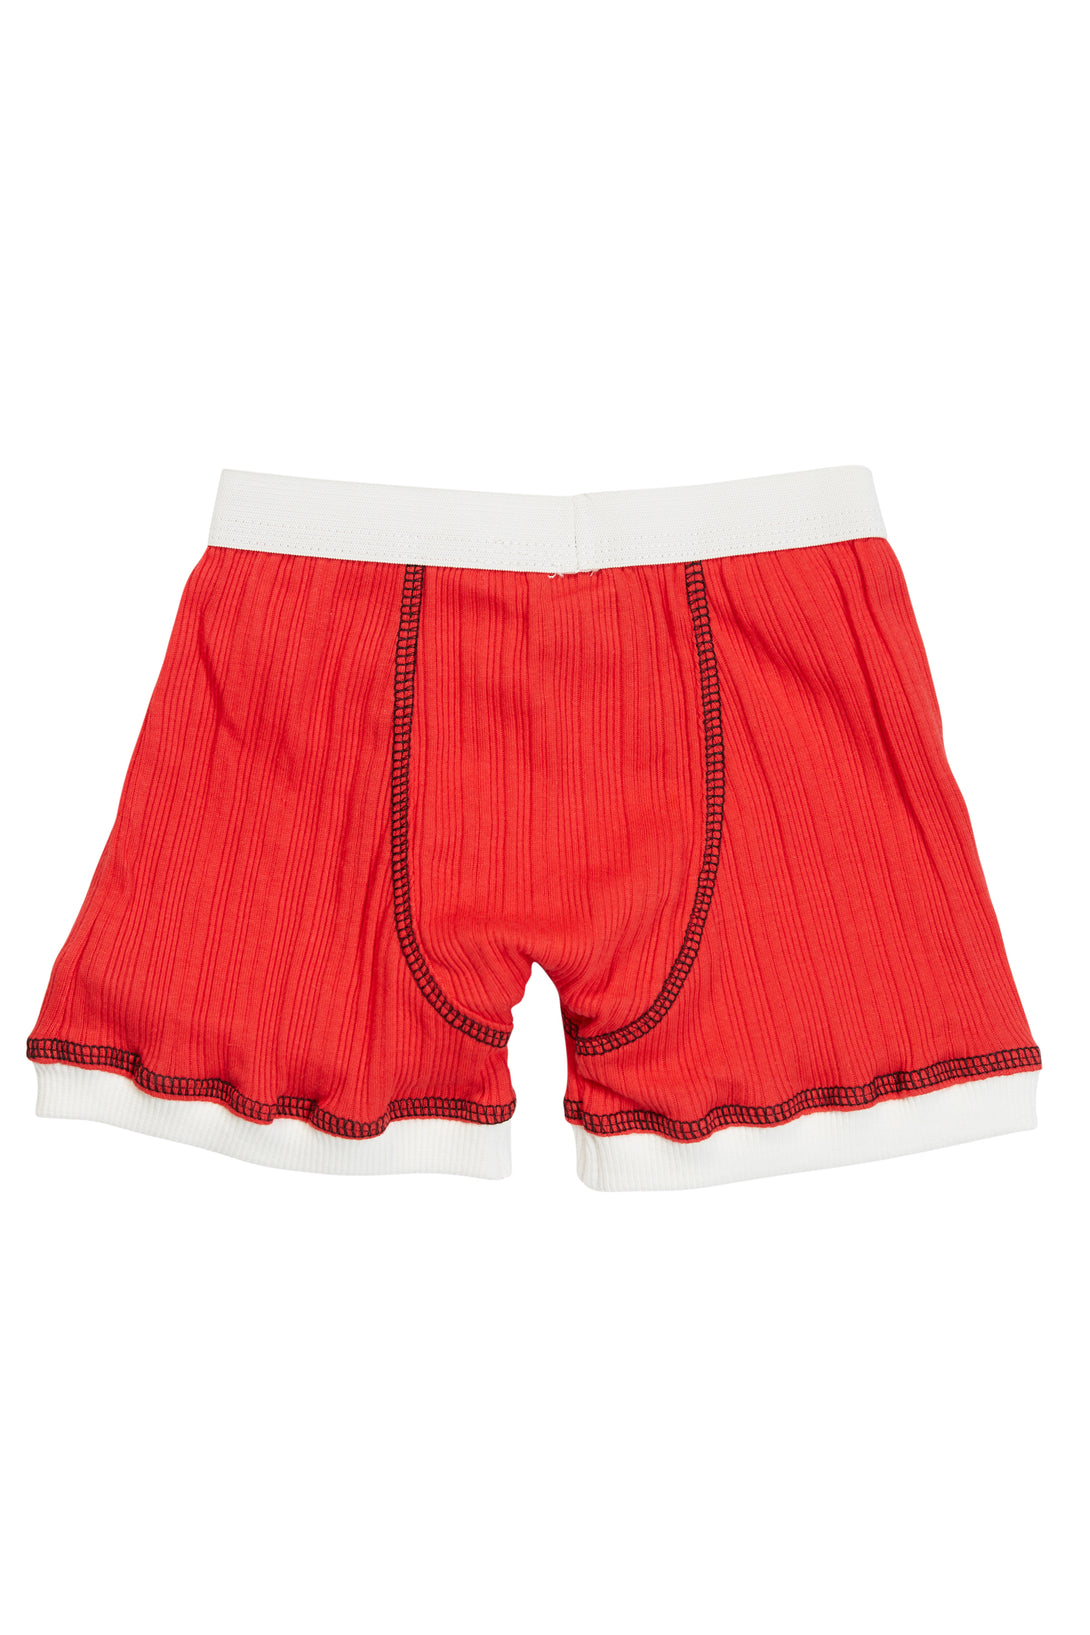 An image of Knuckleheads Logo Red Skivvies for Kids, showcasing stylish black underwear with the iconic Knuckleheads logo. These comfortable and trendy undergarments are perfect for children, combining fashion and comfort seamlessly.